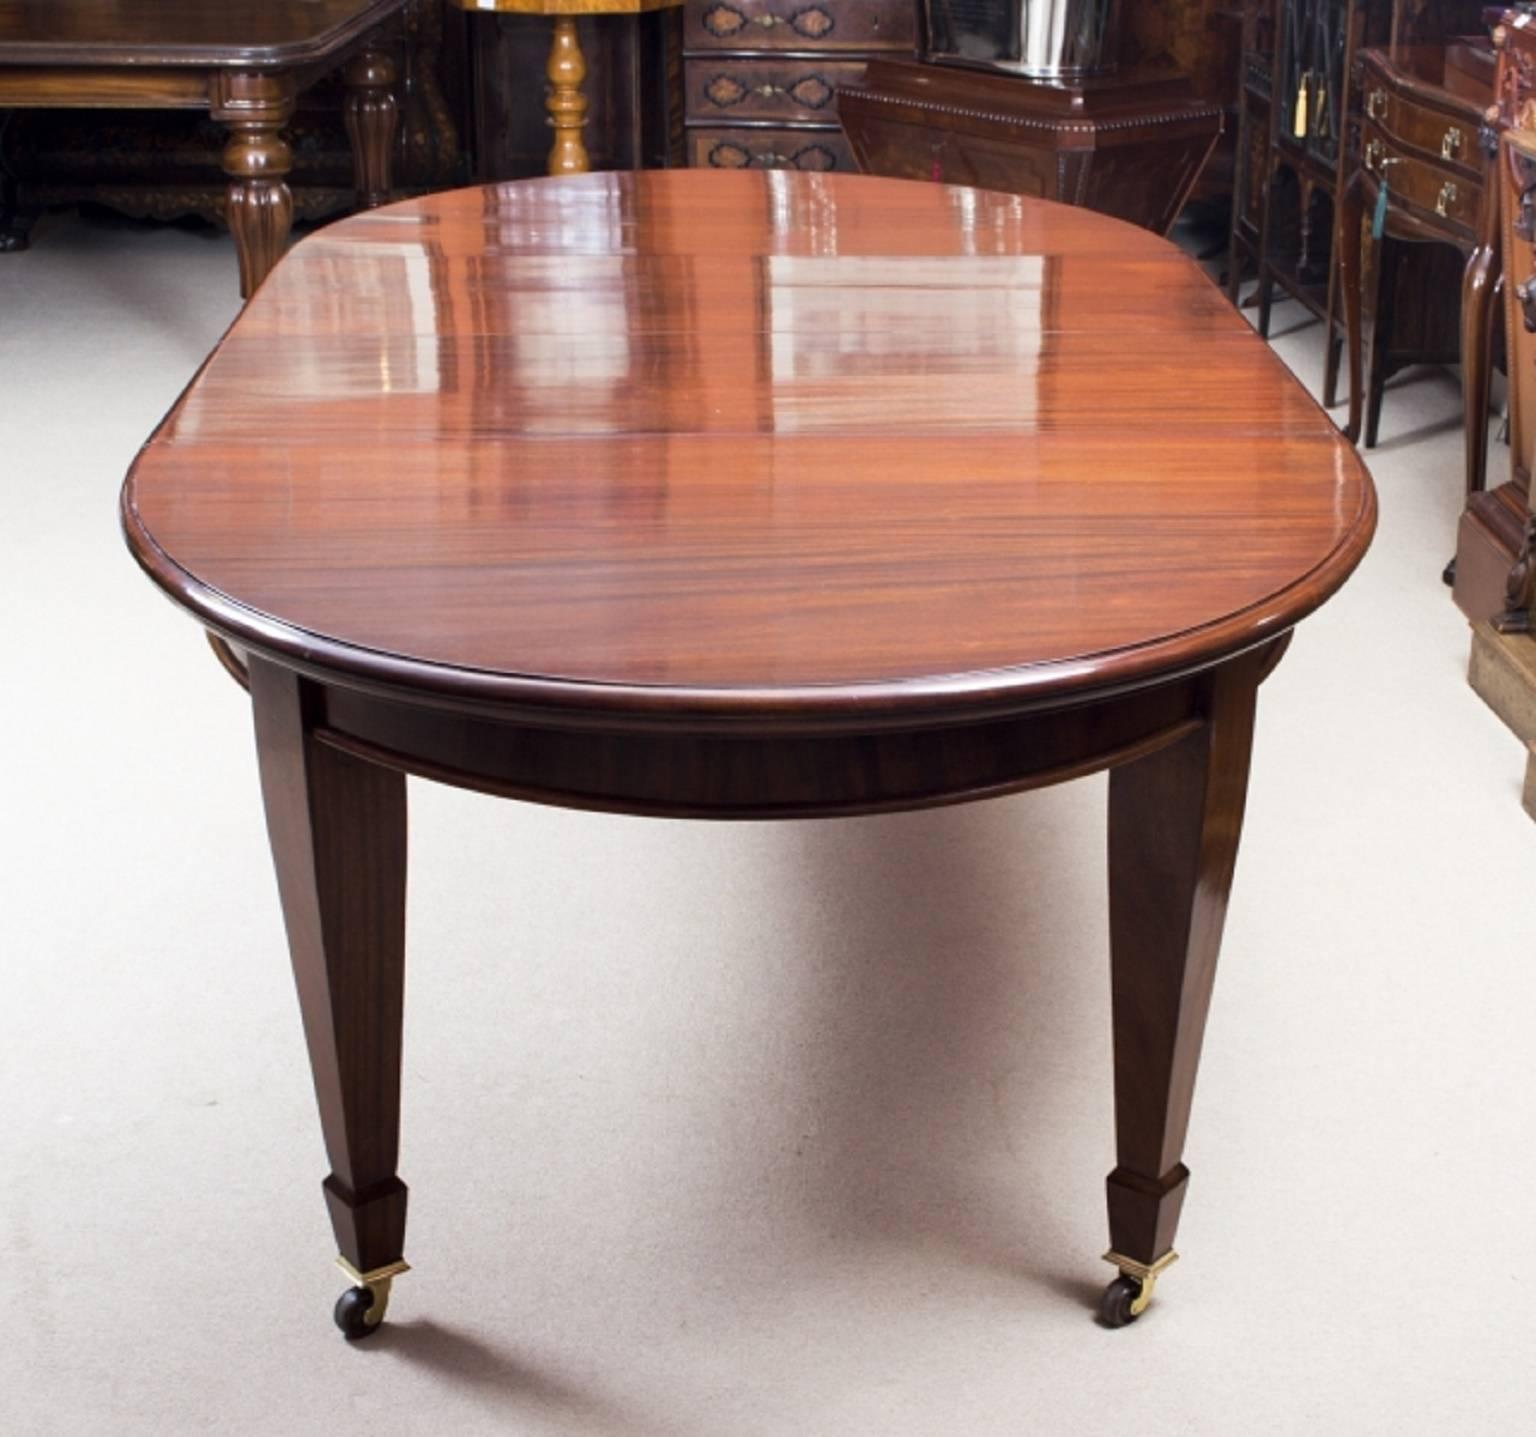 This is an extremely rare opportunity to own an antique Edwardian oval extending dining table which can comfortably seat eight, made of flame mahogany this table is sure to get noticed wherever it is placed.

It has two leaves which can be added